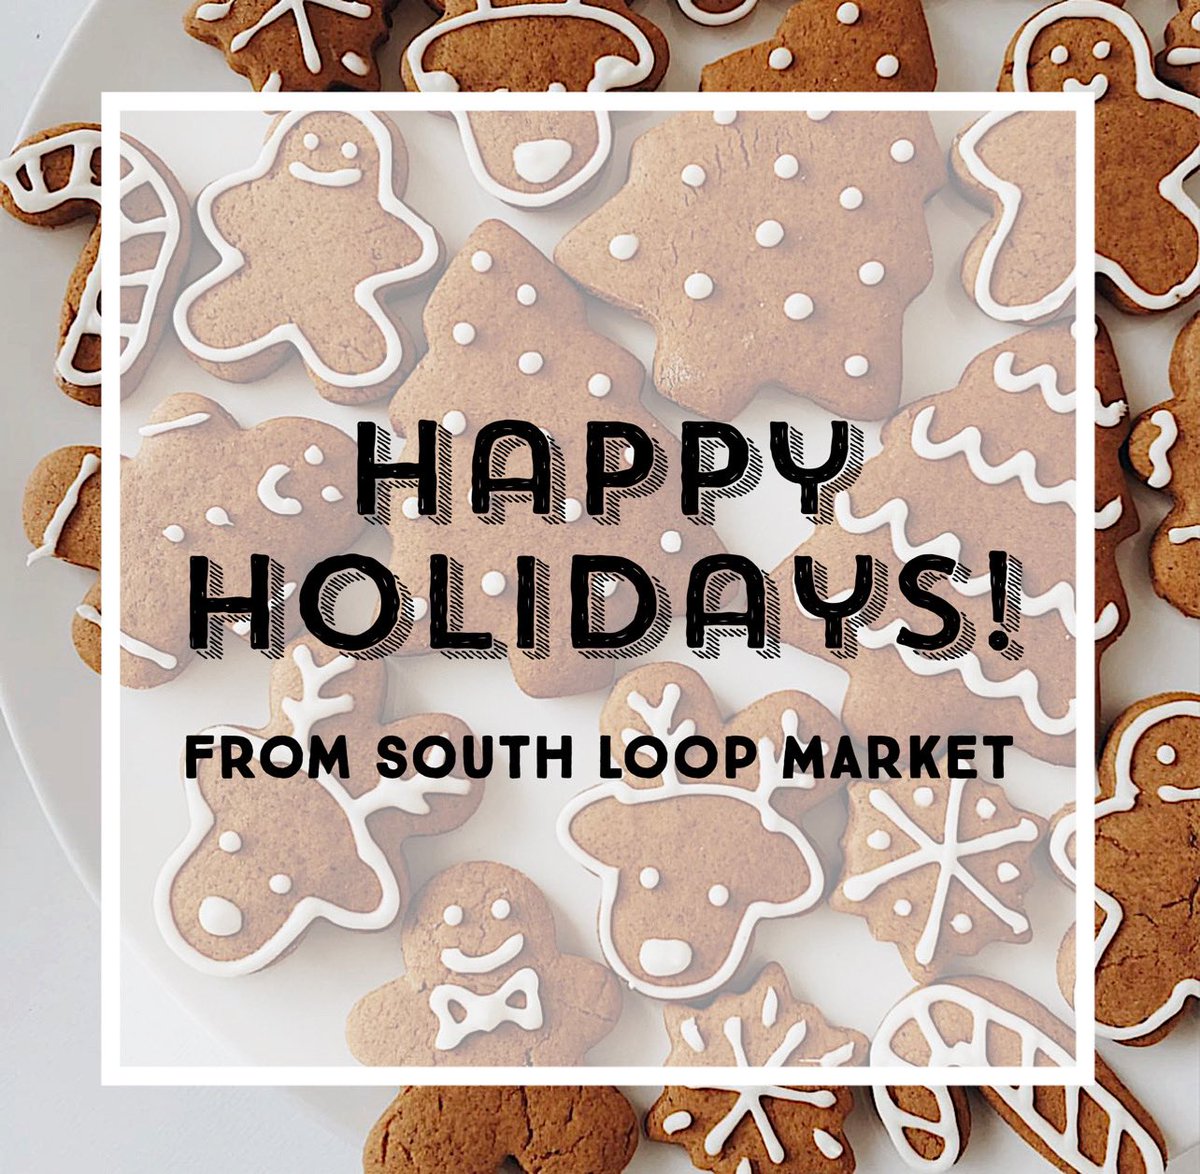 Happy Holidays, Chicago! Wishing you and yours all the joys of the season 🎅🍪🎄✨ #southloopmarkets #happyholidays